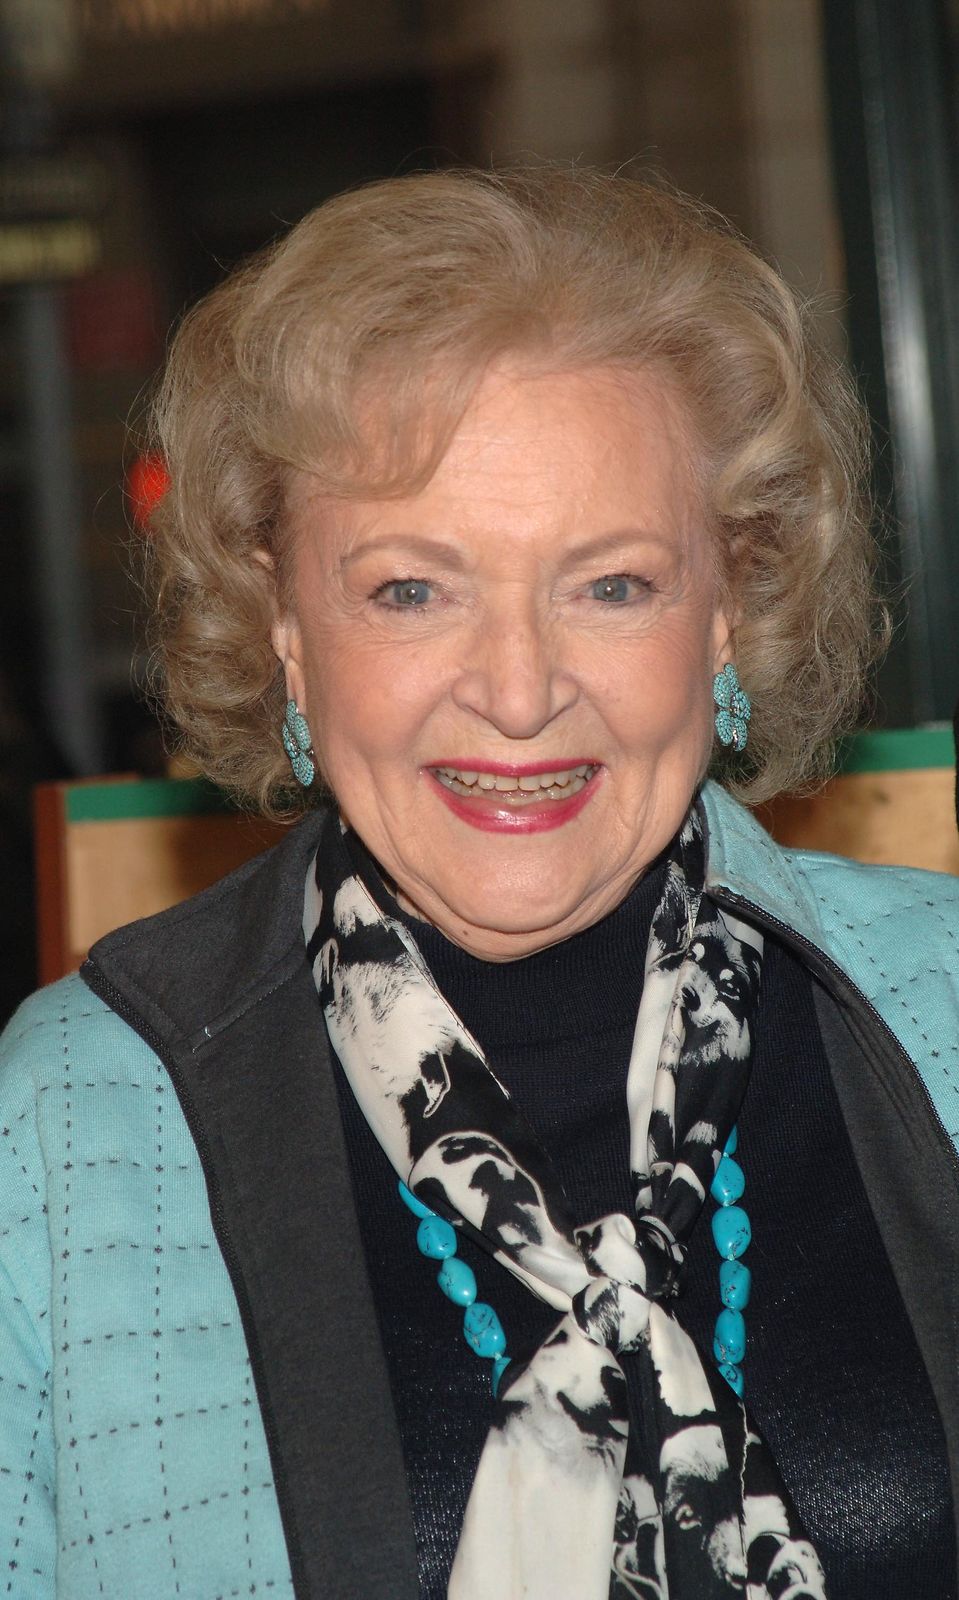 Betty White signs copies of "The Golden Gilrs Season 3" DVD at Barnes & Noble on November 22, 2005 in New York City. | Photo: Getty Images